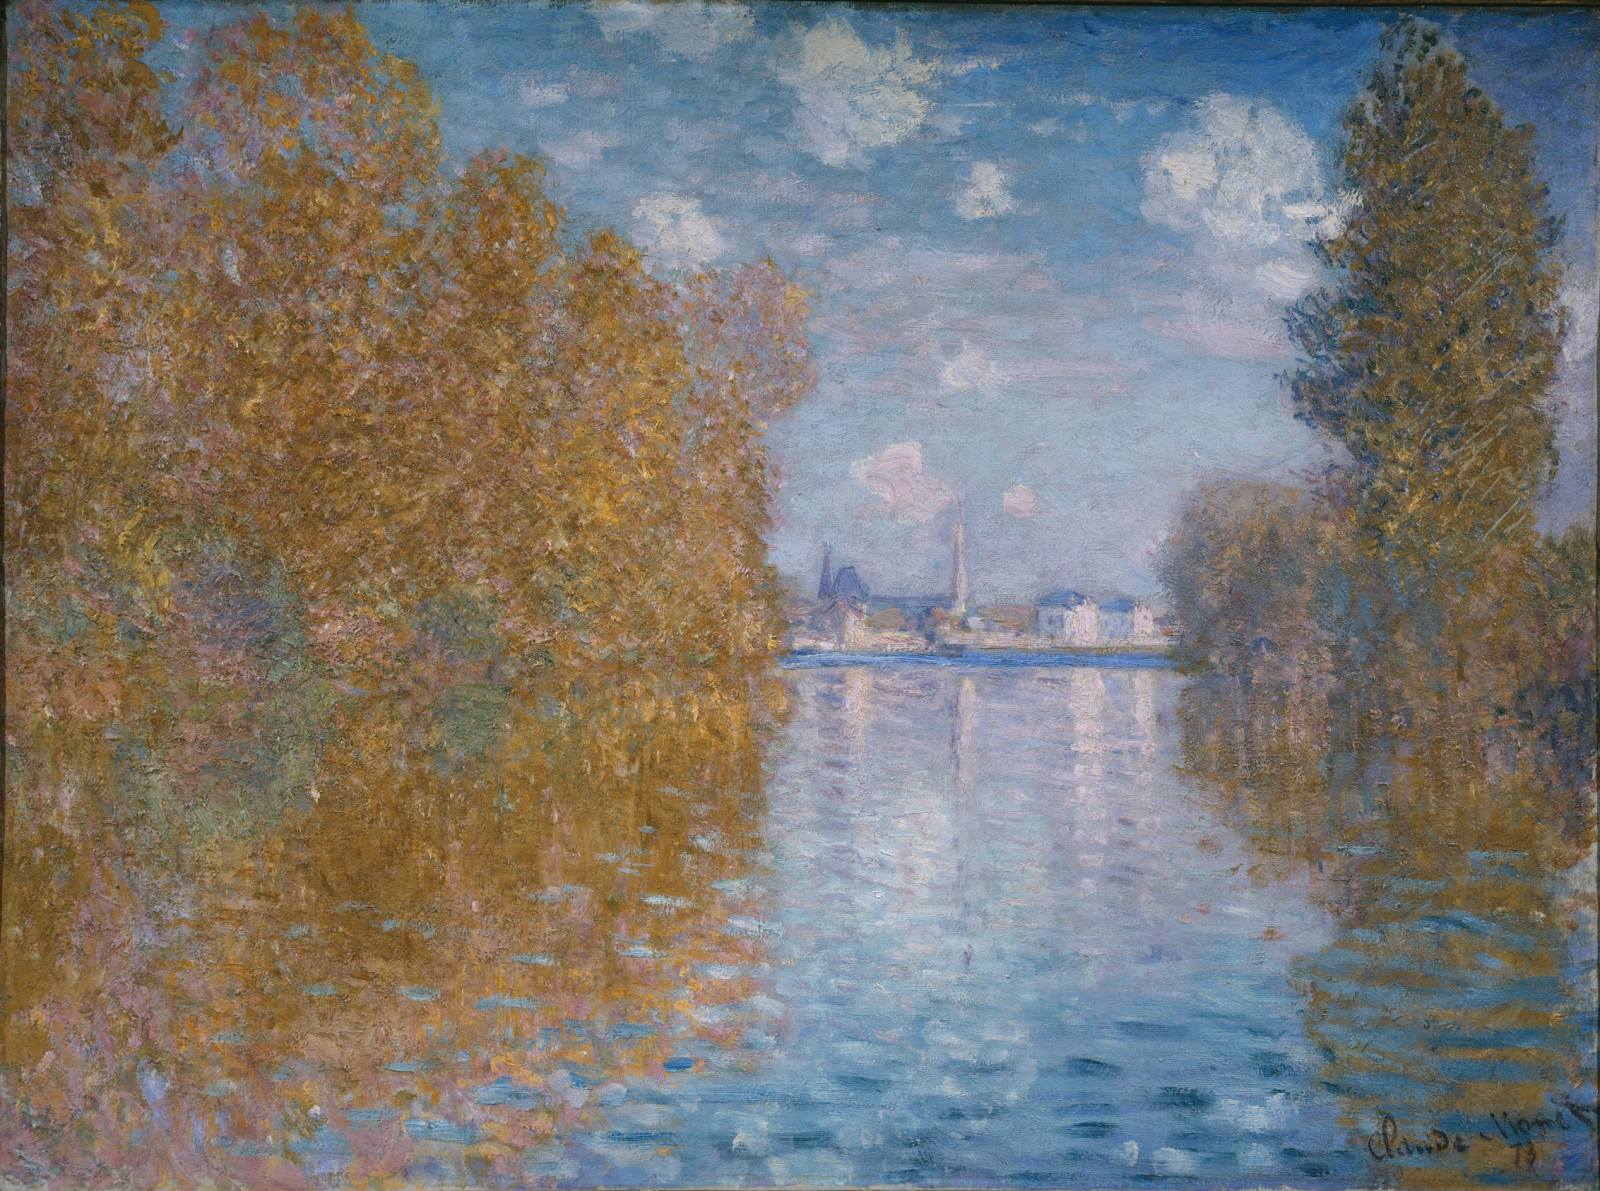 Autumn Effect at Argenteuil by Claude Monet - 1873 - 55 x 74.5 cm The Courtauld Gallery